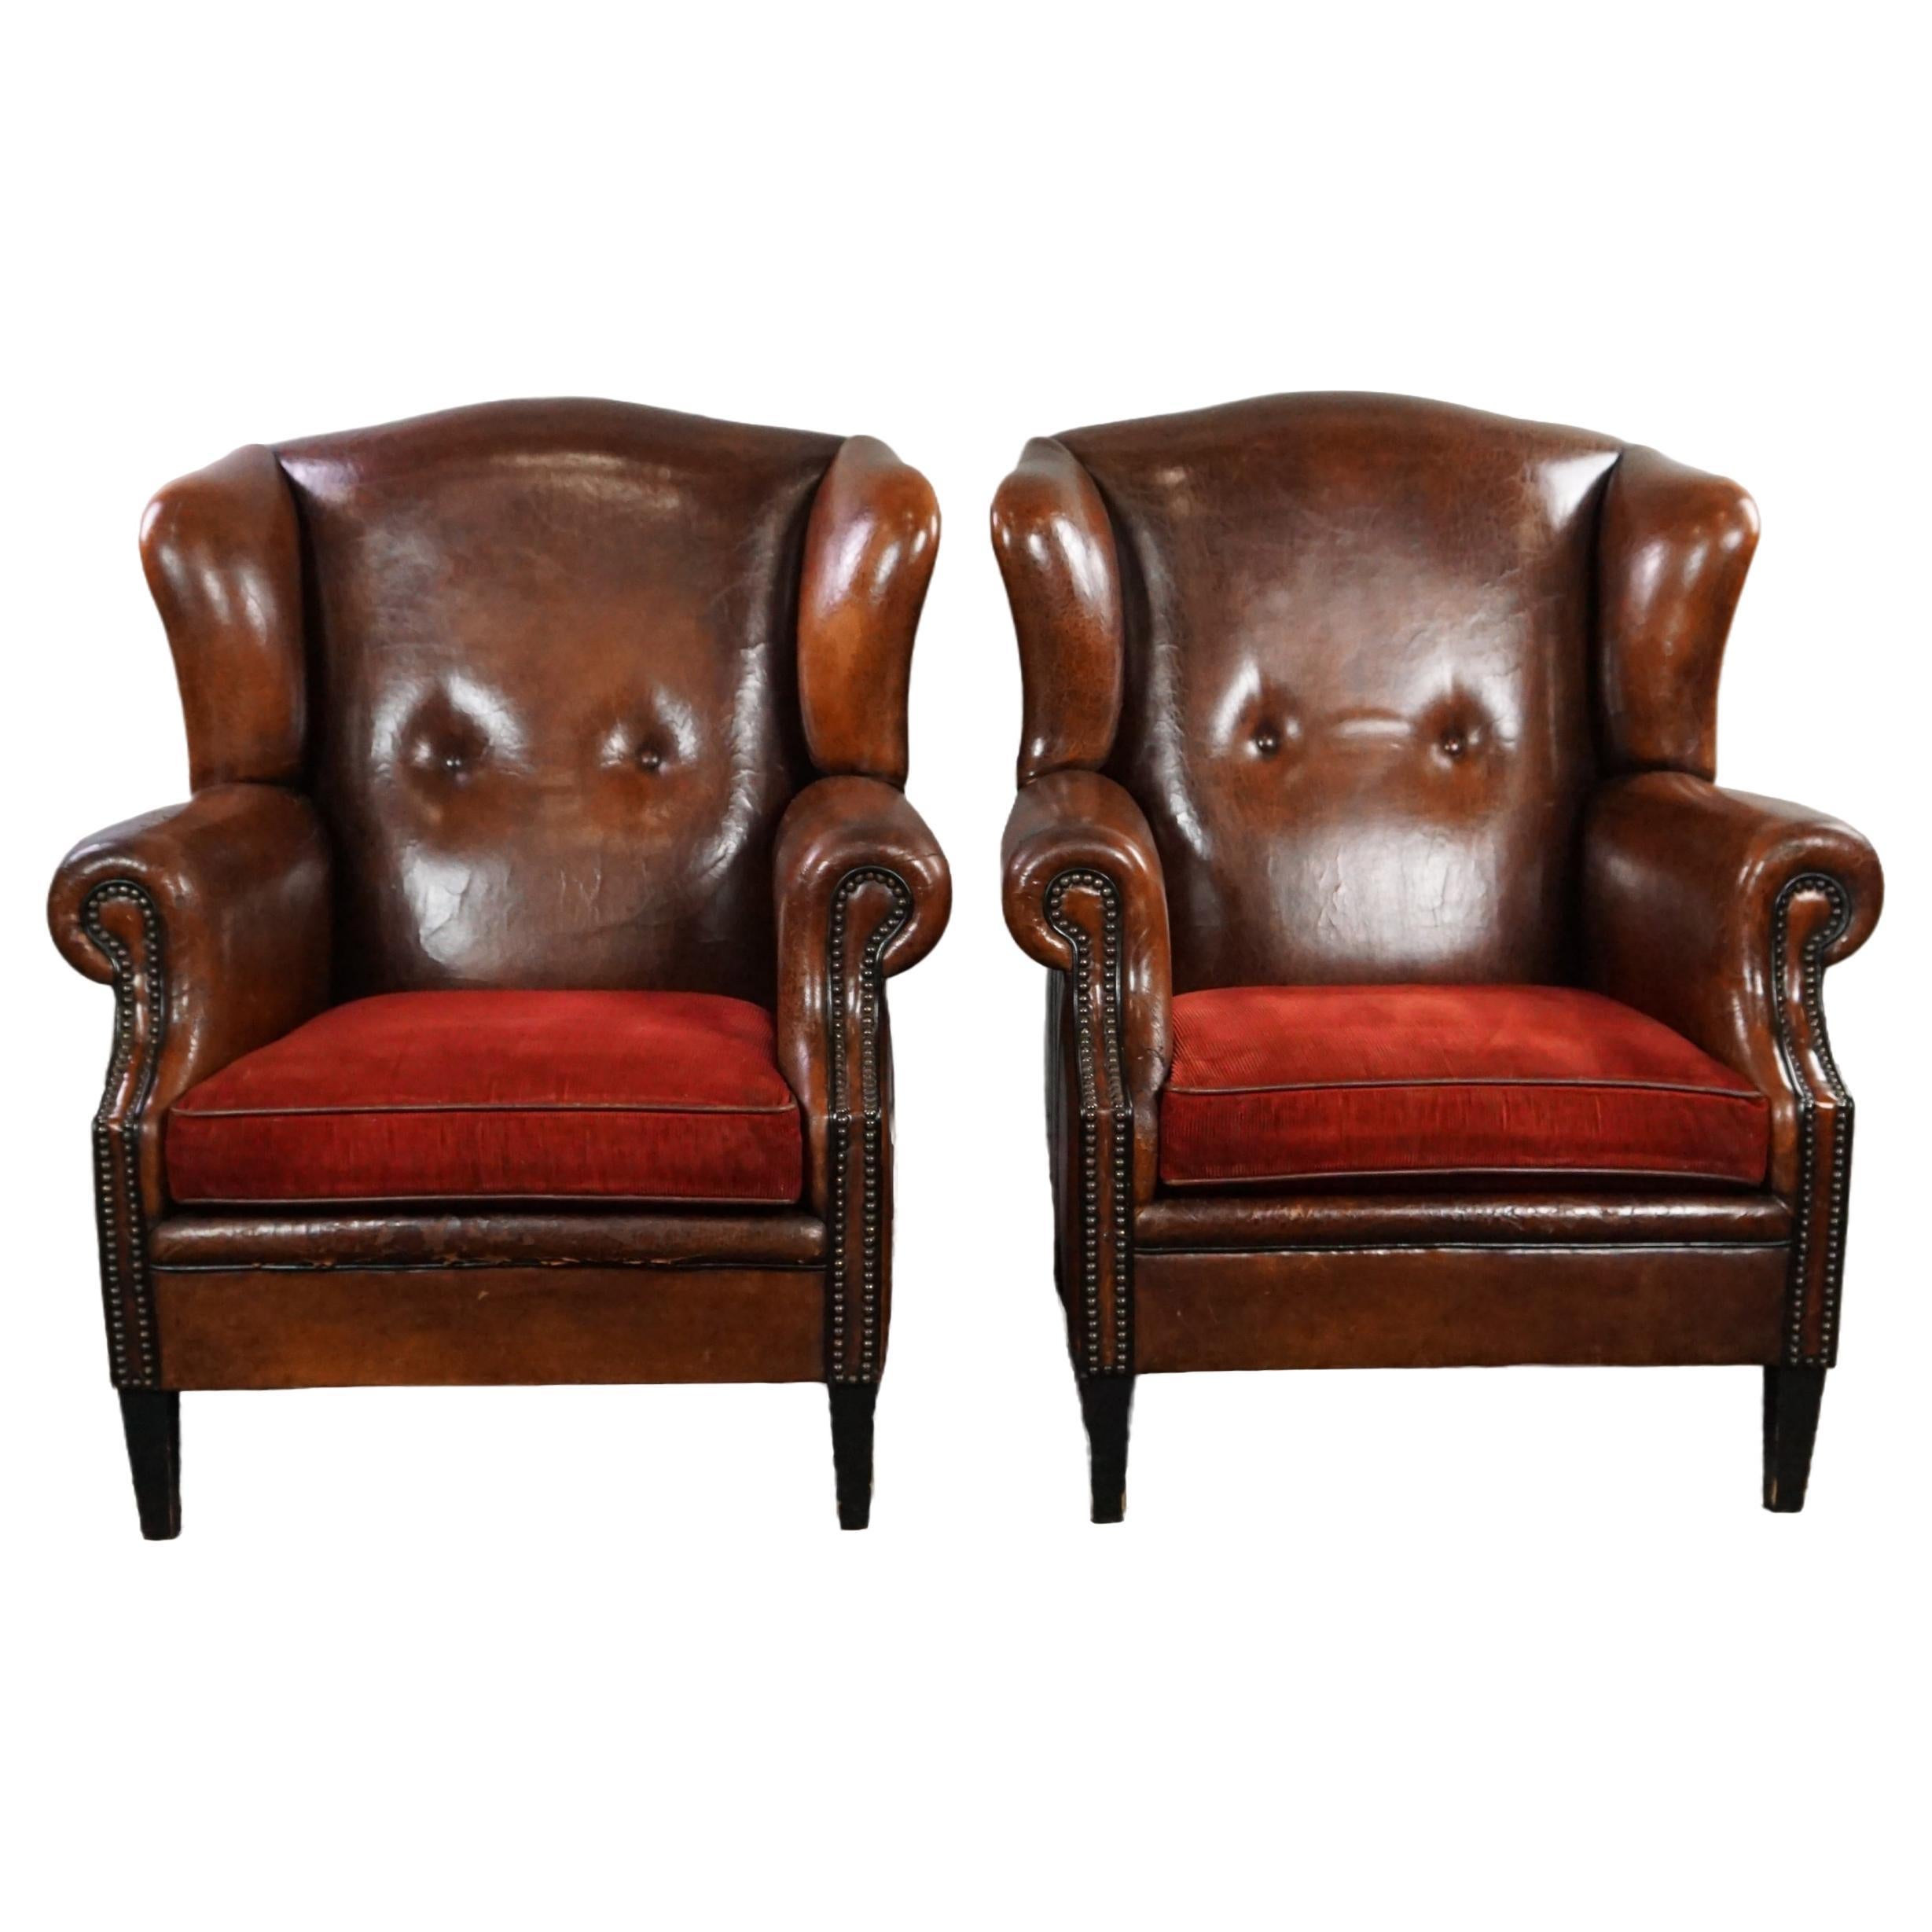 Set of two stylish sheep leather wing chairs with red corduroy seat cushions For Sale